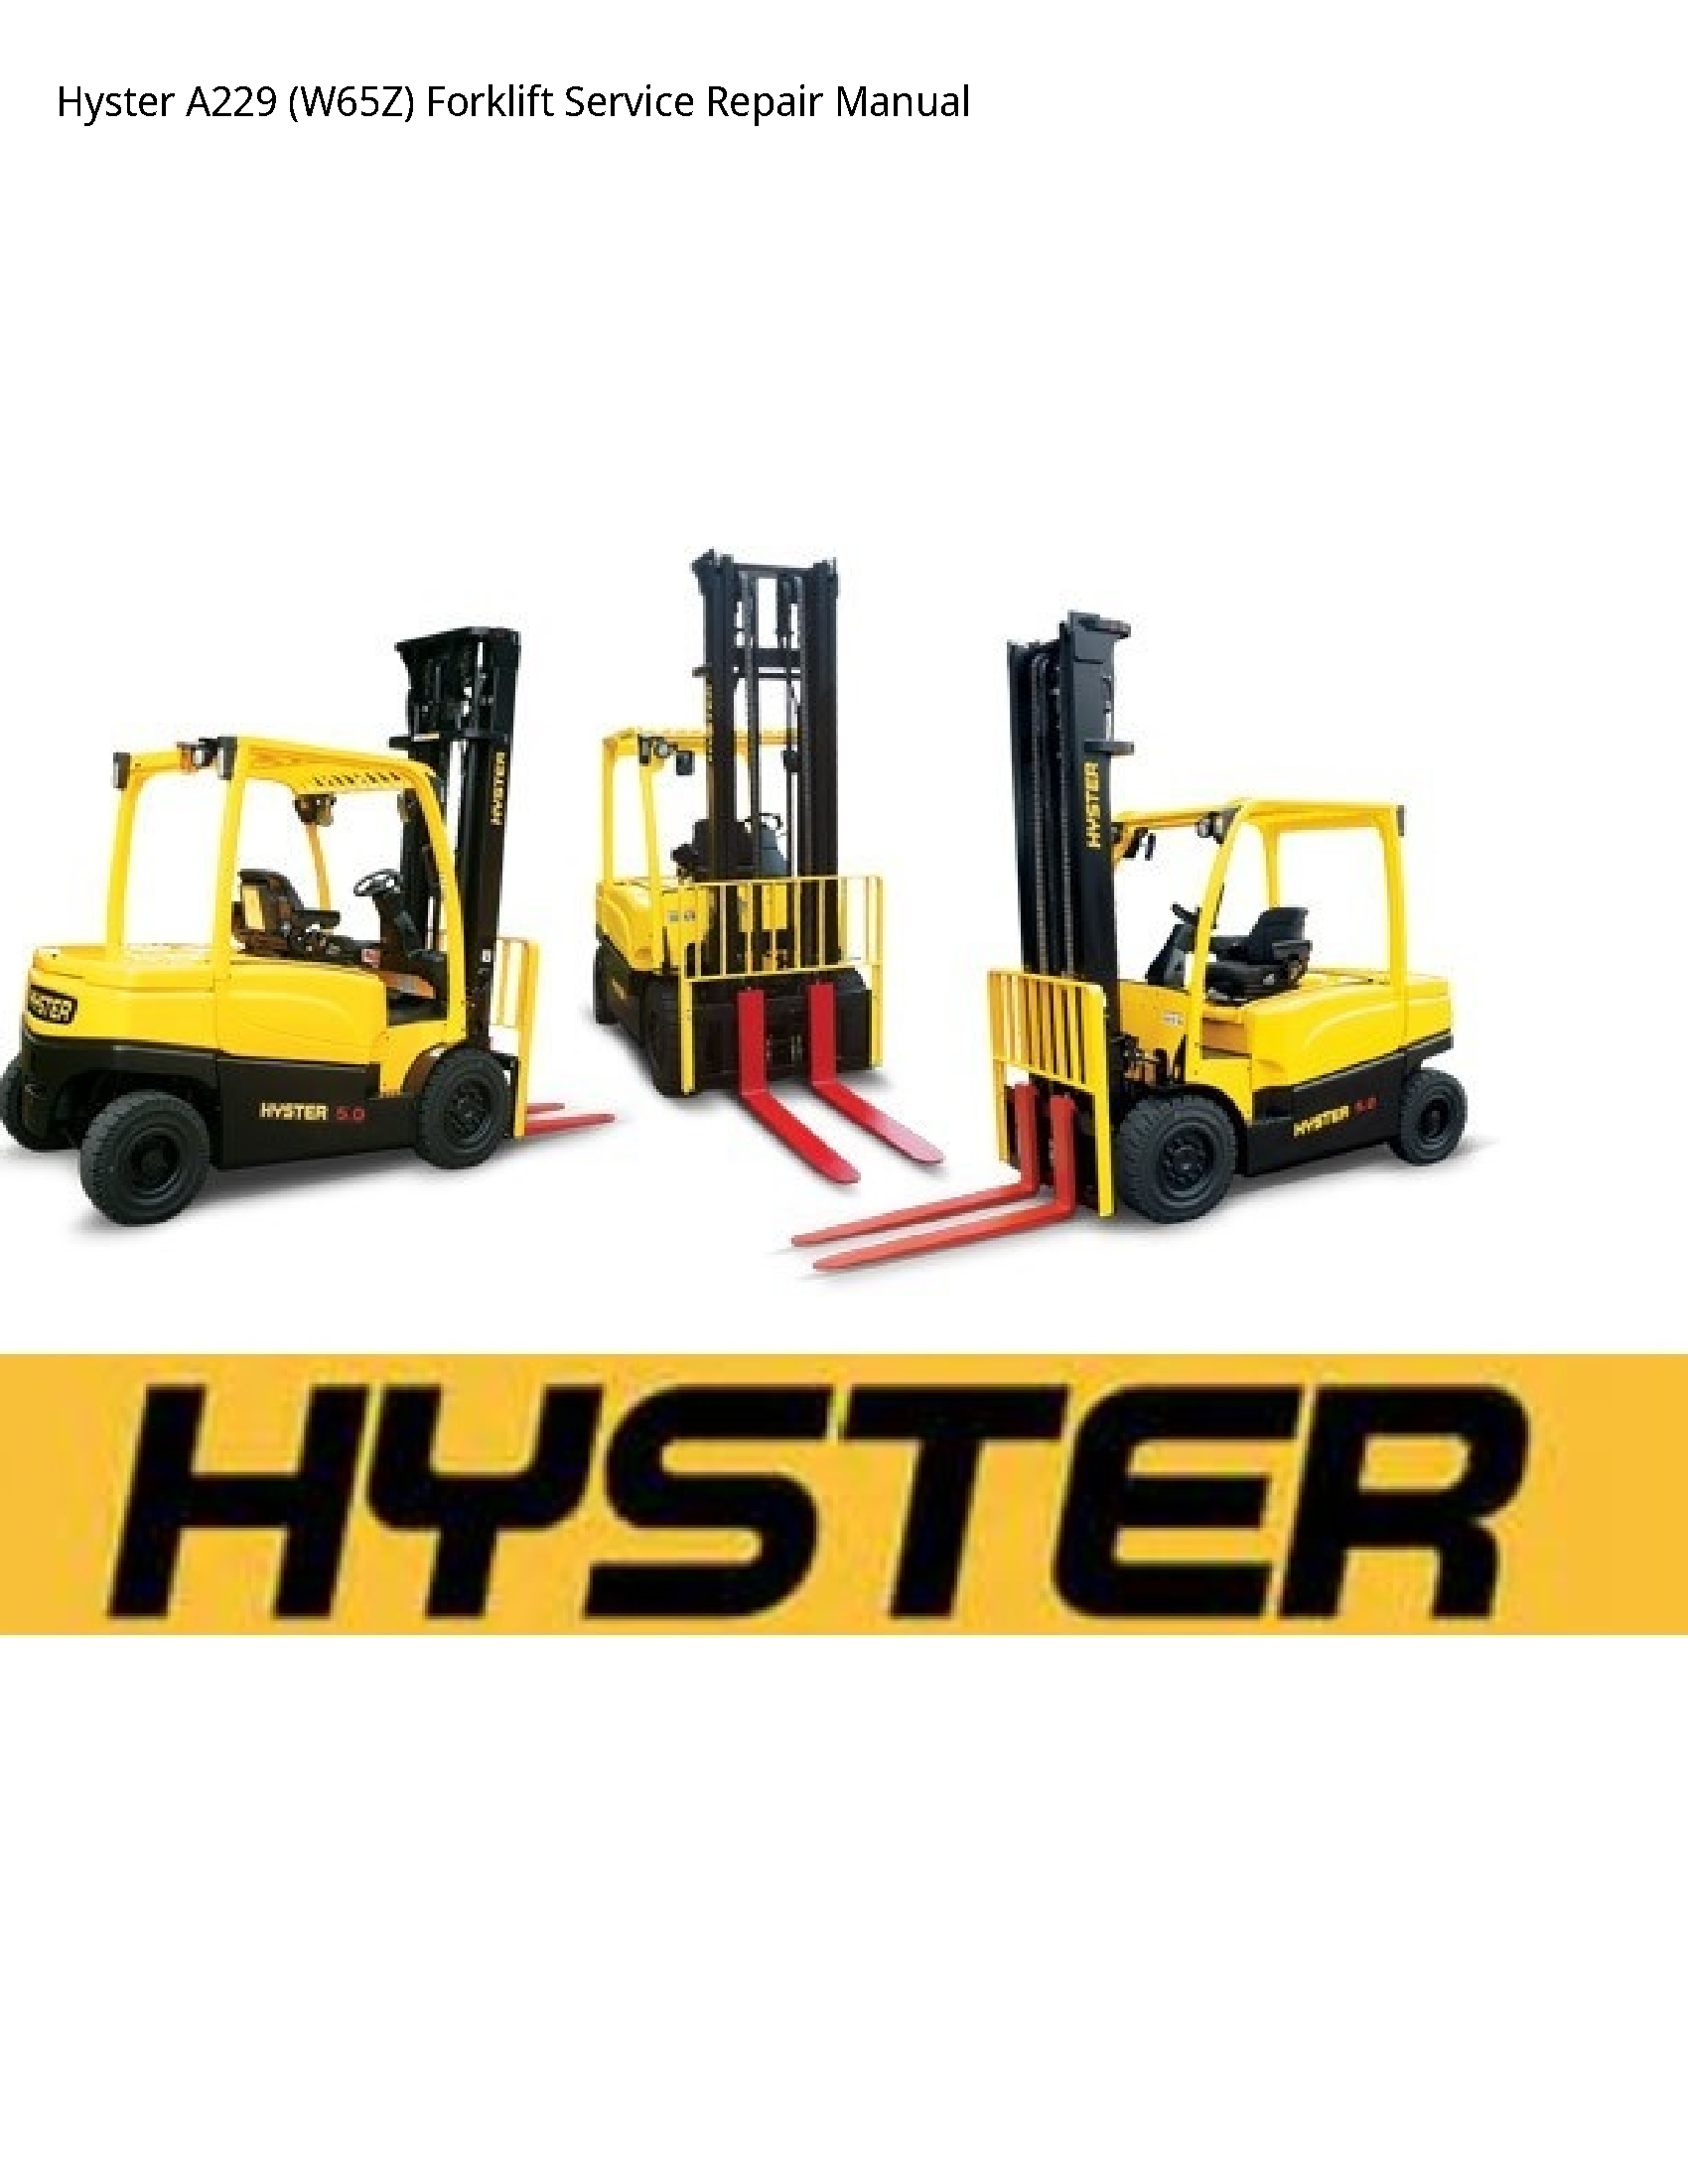 Hyster A229 Forklift manual